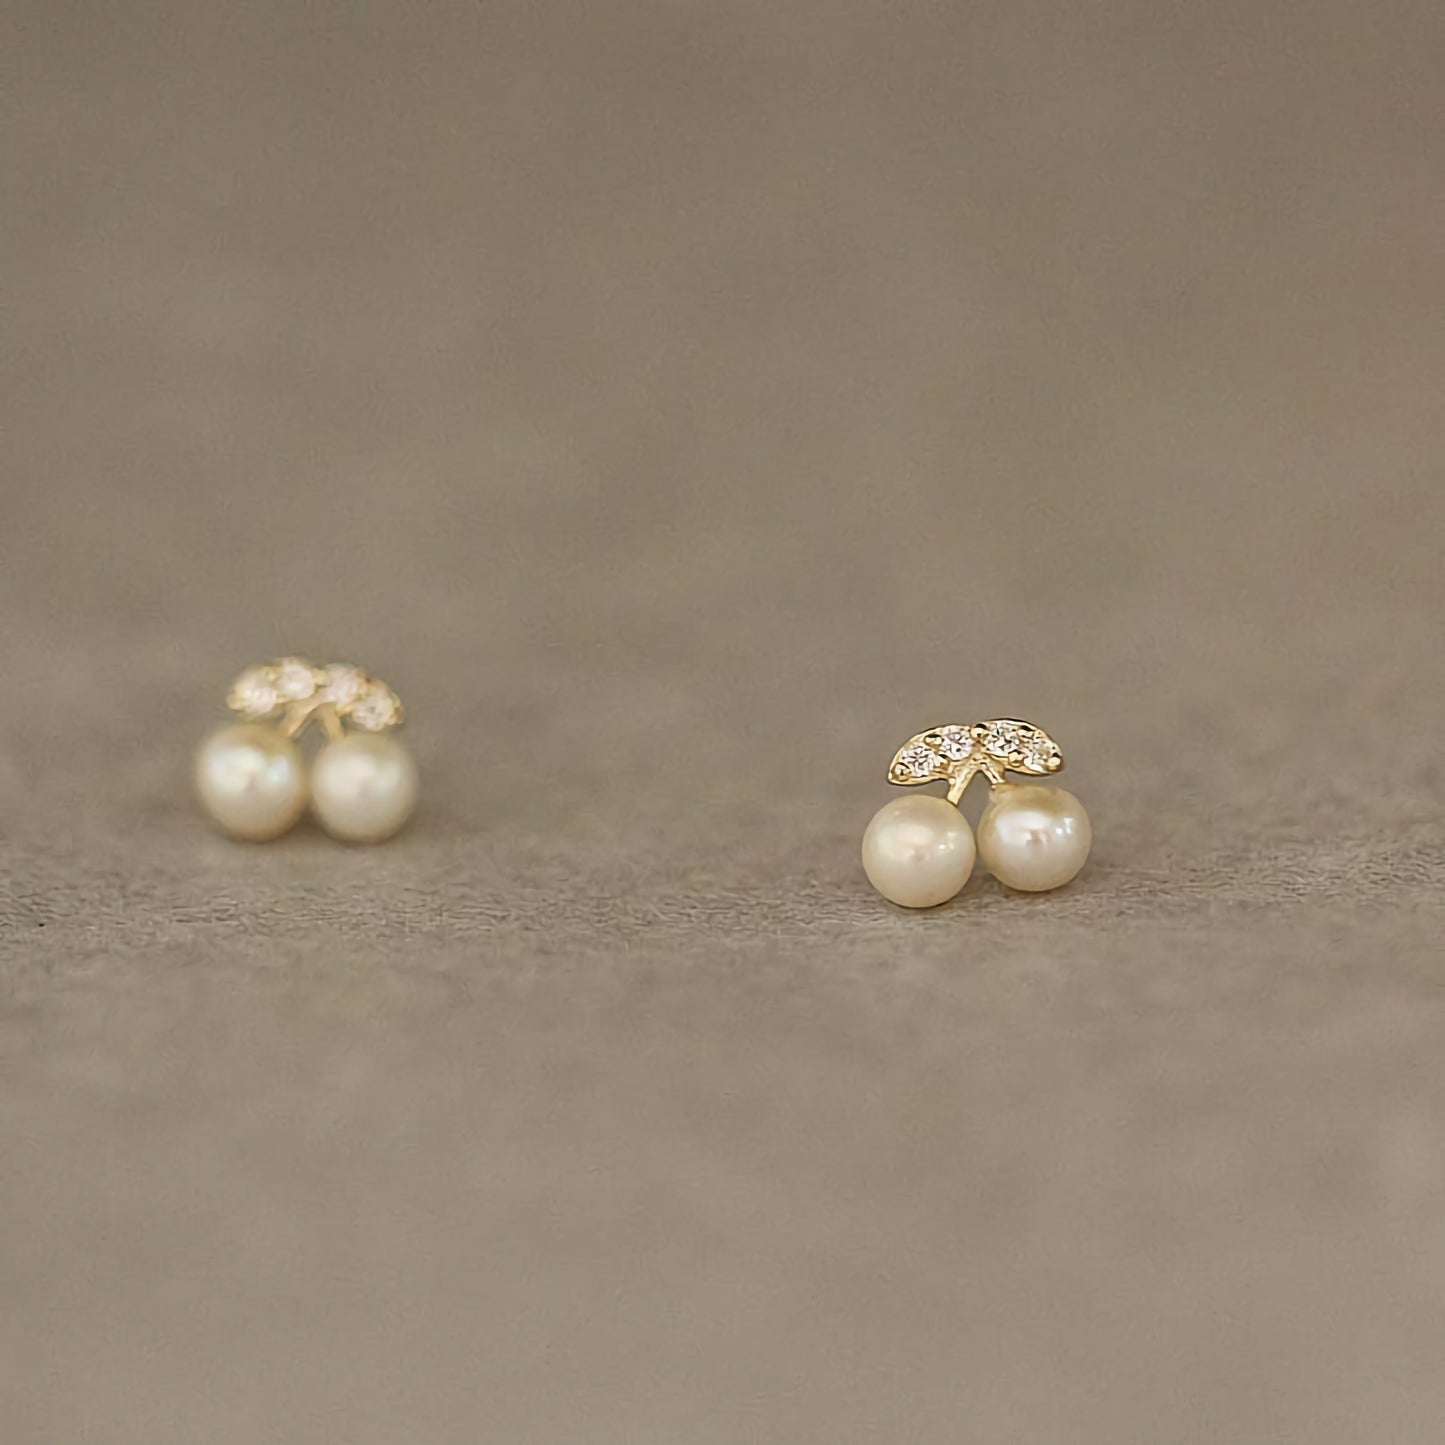 A pair of 9ct solid gold cherry earrings featuring pearls, exemplifying both fun and sophistication.